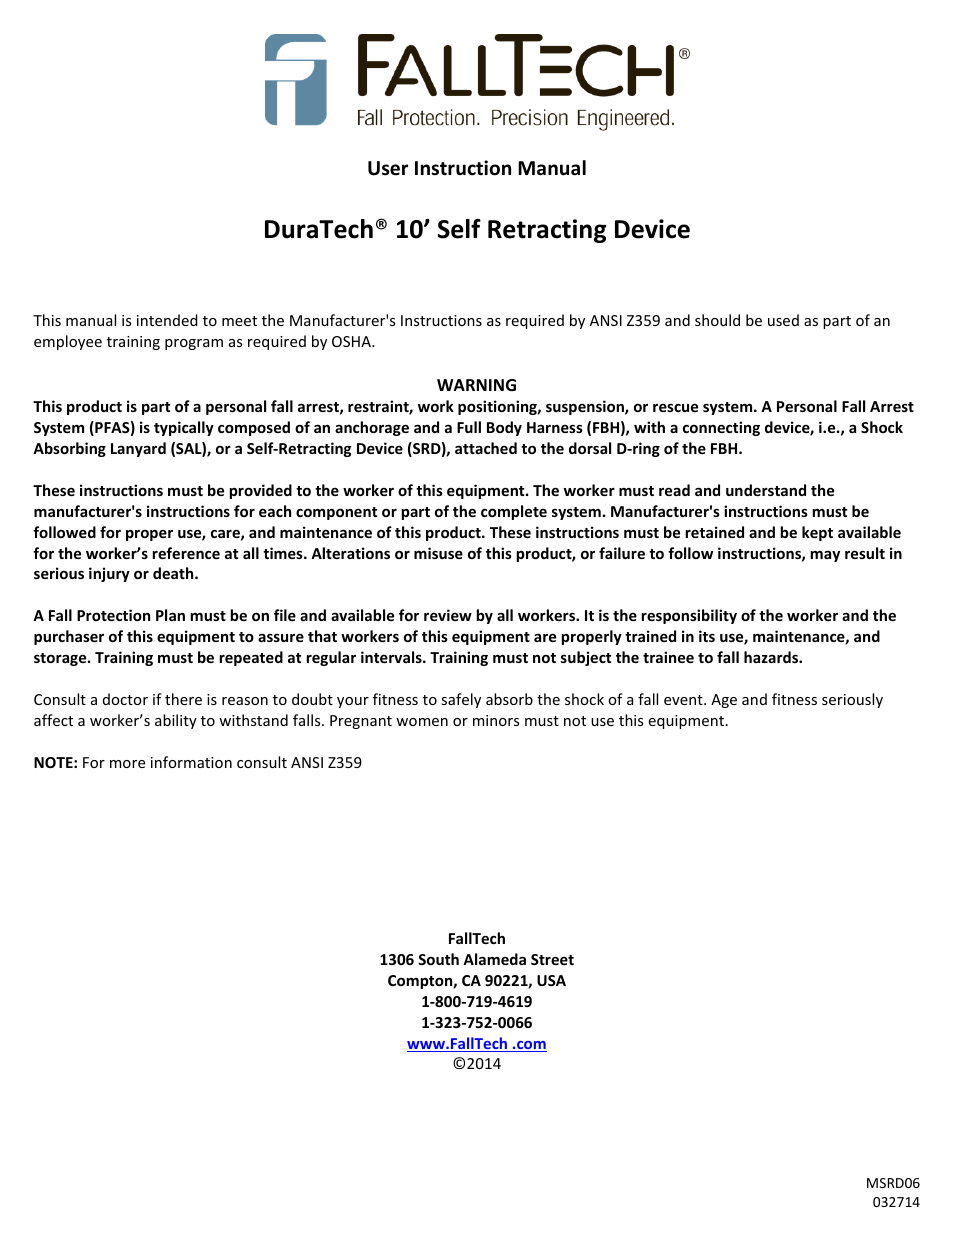 FallTech DuraTech 10’ Self Retracting Device User Manual | 30 pages